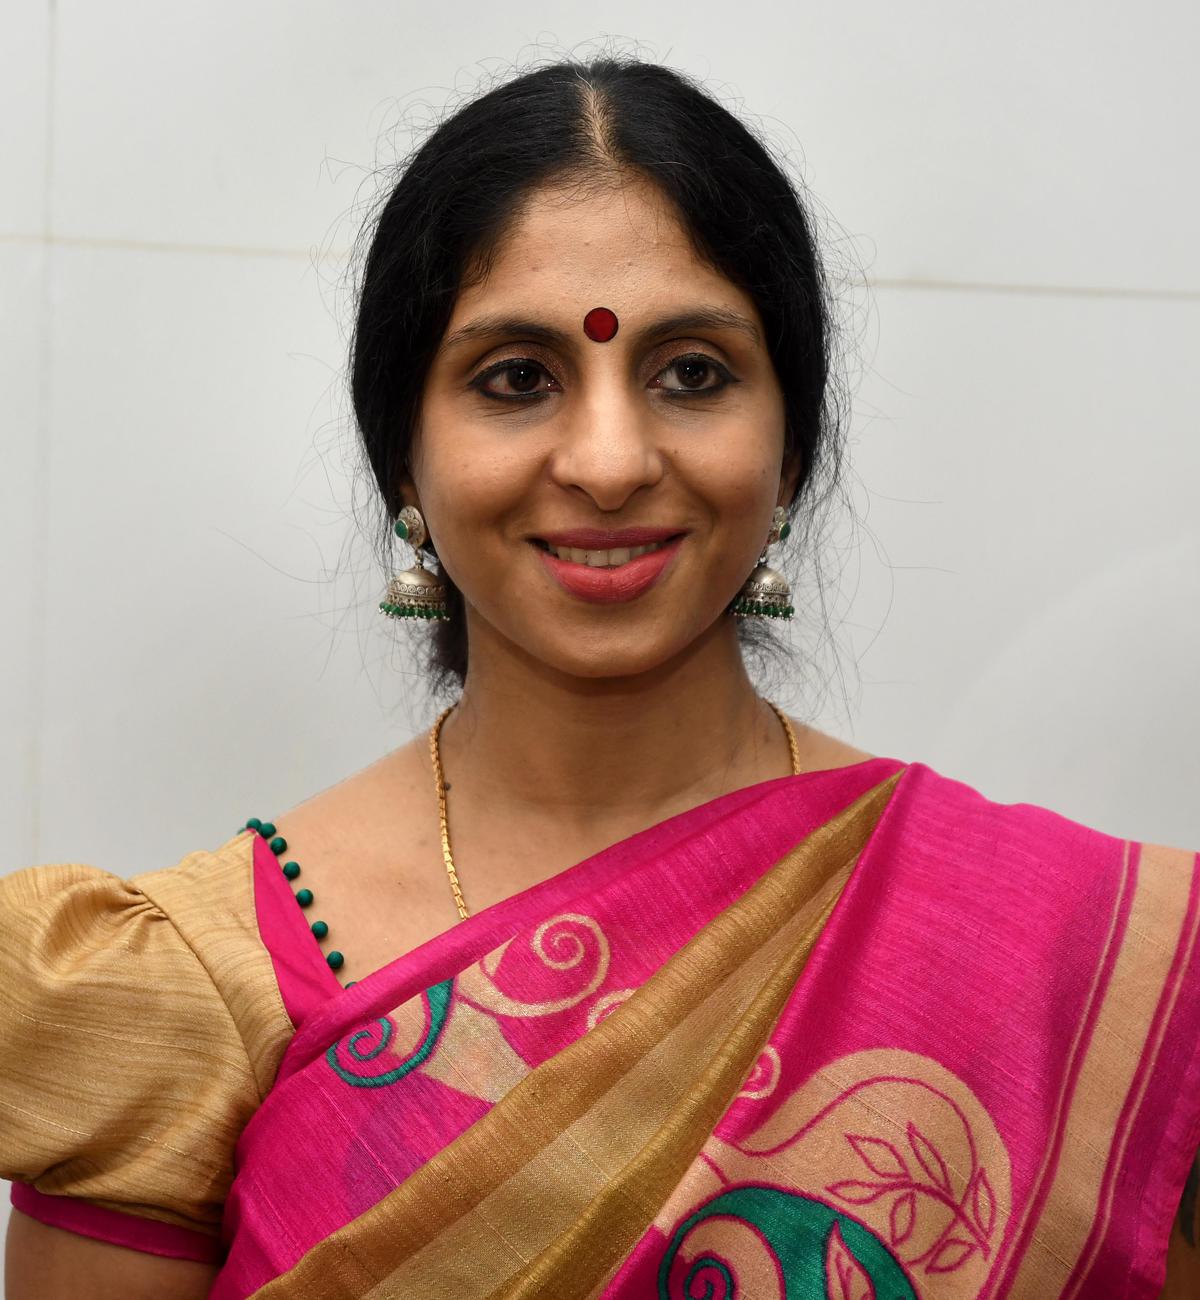 Gynaecologist and clinical embryologist Priya Selvaraj, scientific and clinical head of GG Hospital in Chennai.